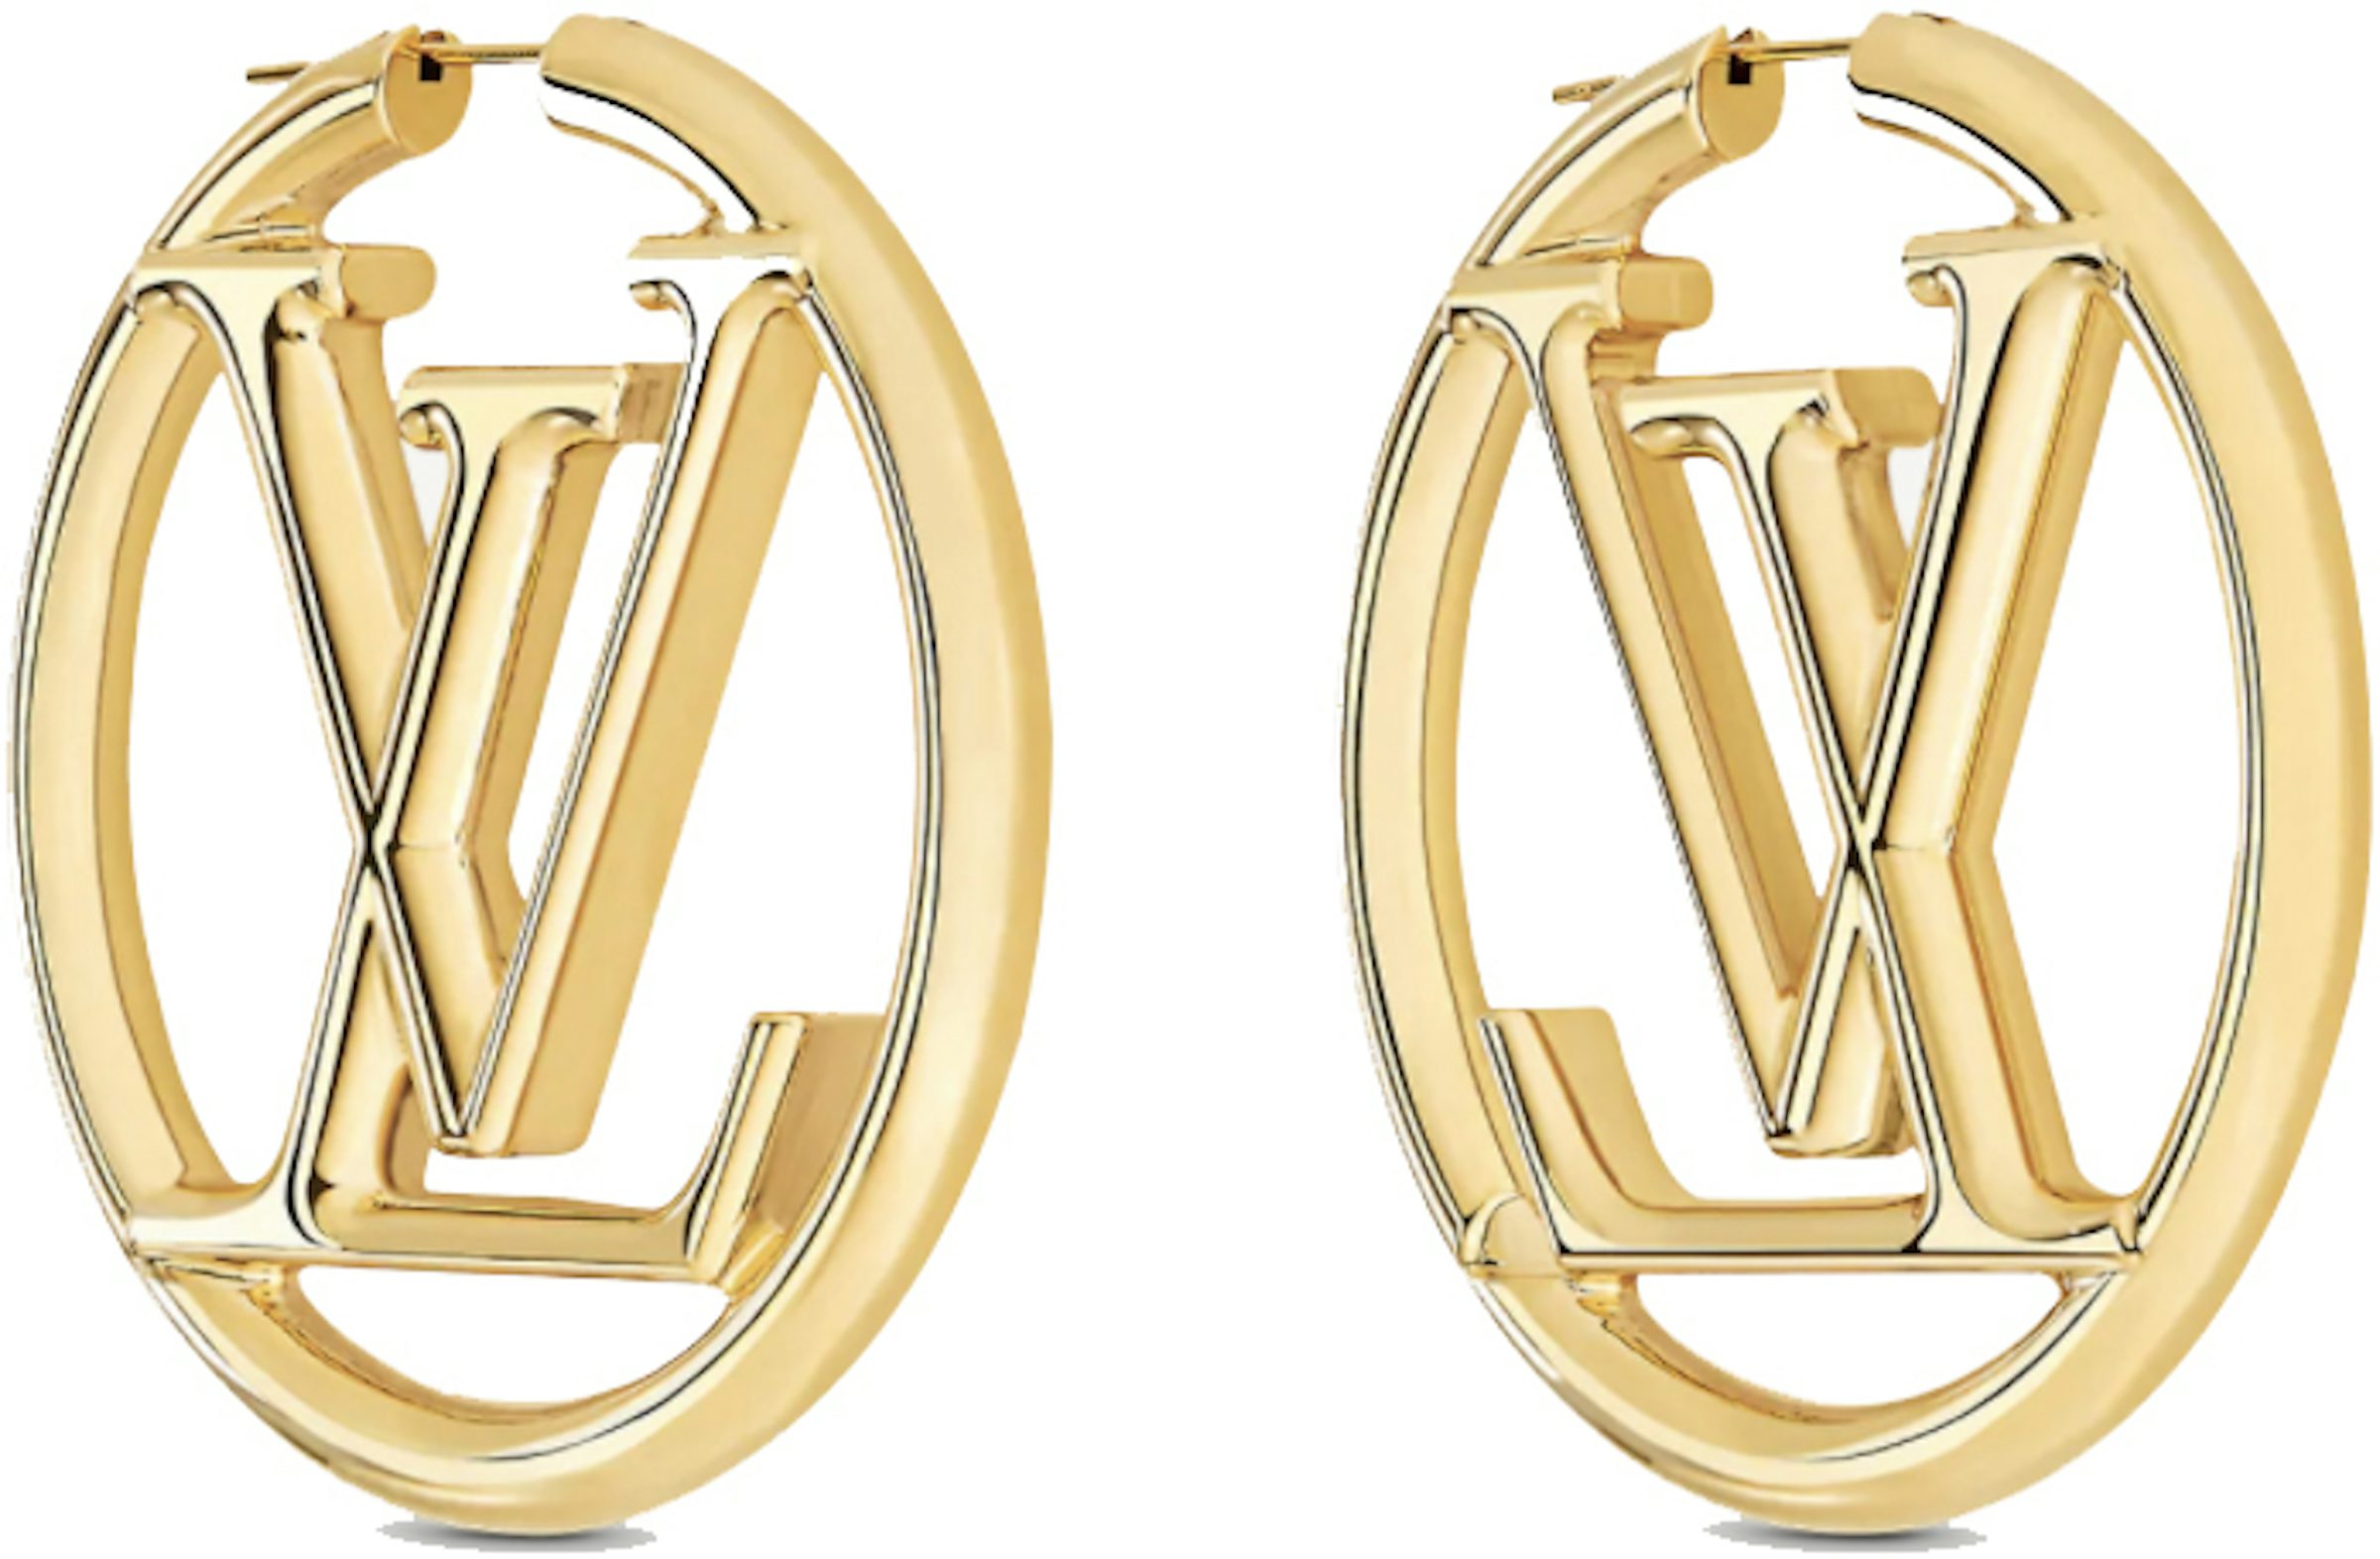 Louis Vuitton Louise earrings! $800, are they worth it?( Unboxing